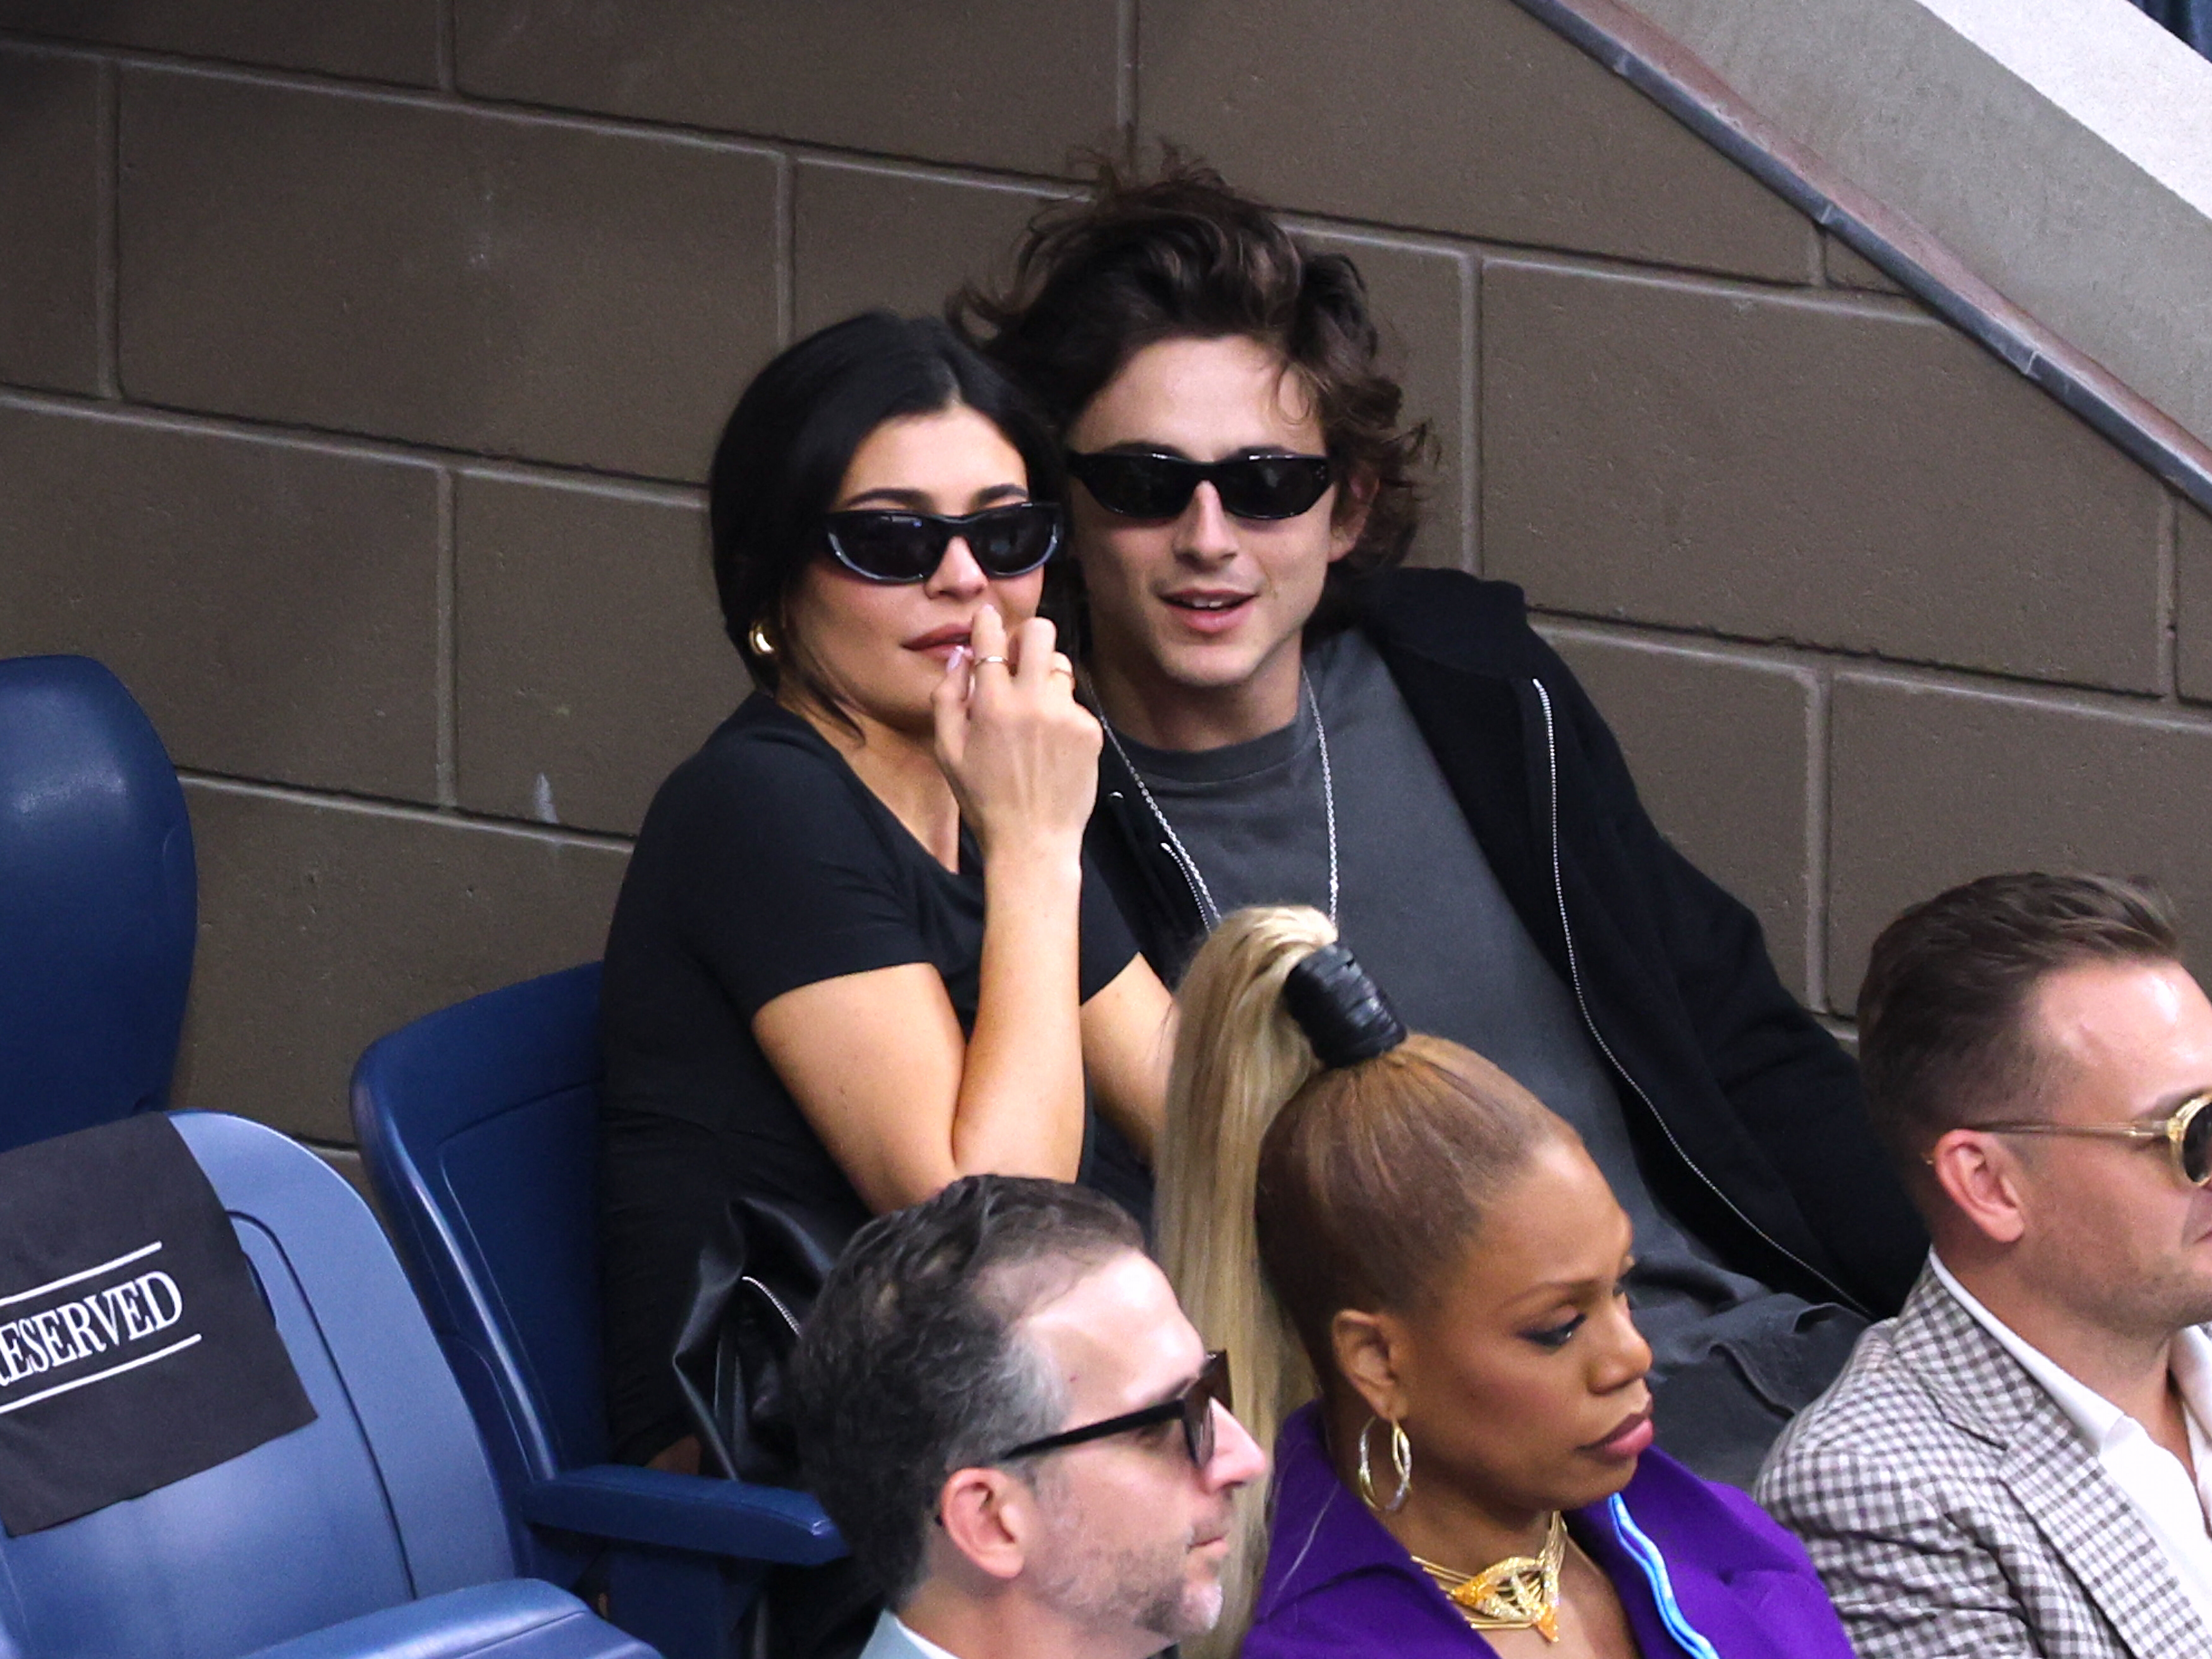 Timothee and Kylie confirmed their relationship in September at a Beyonce concert